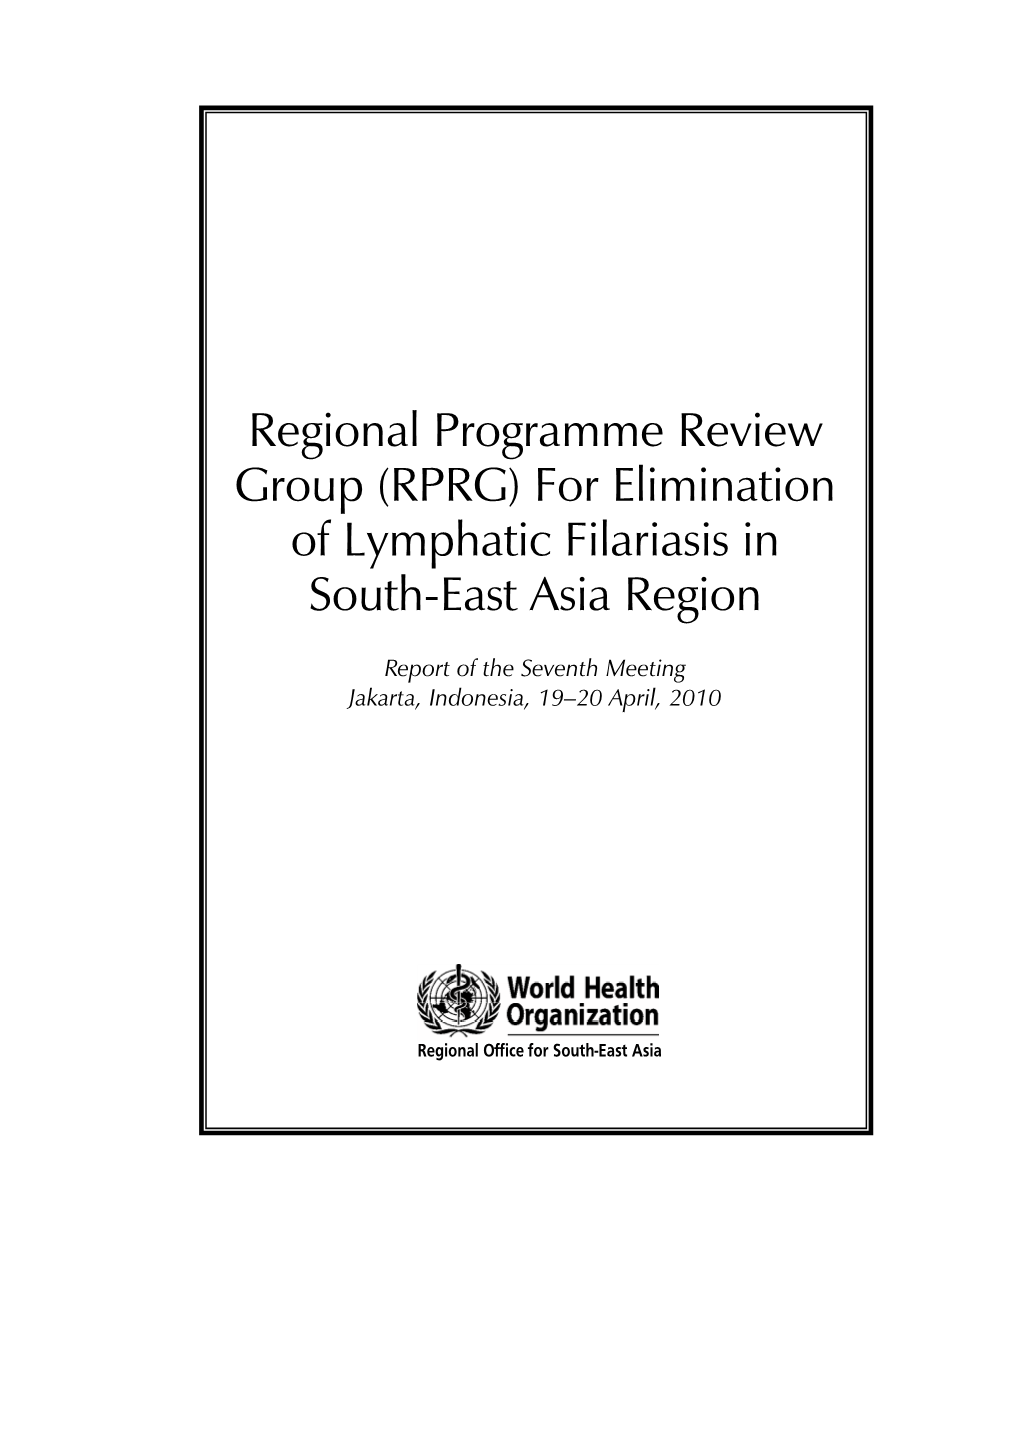 For Elimination of Lymphatic Filariasis in South-East Asia Region